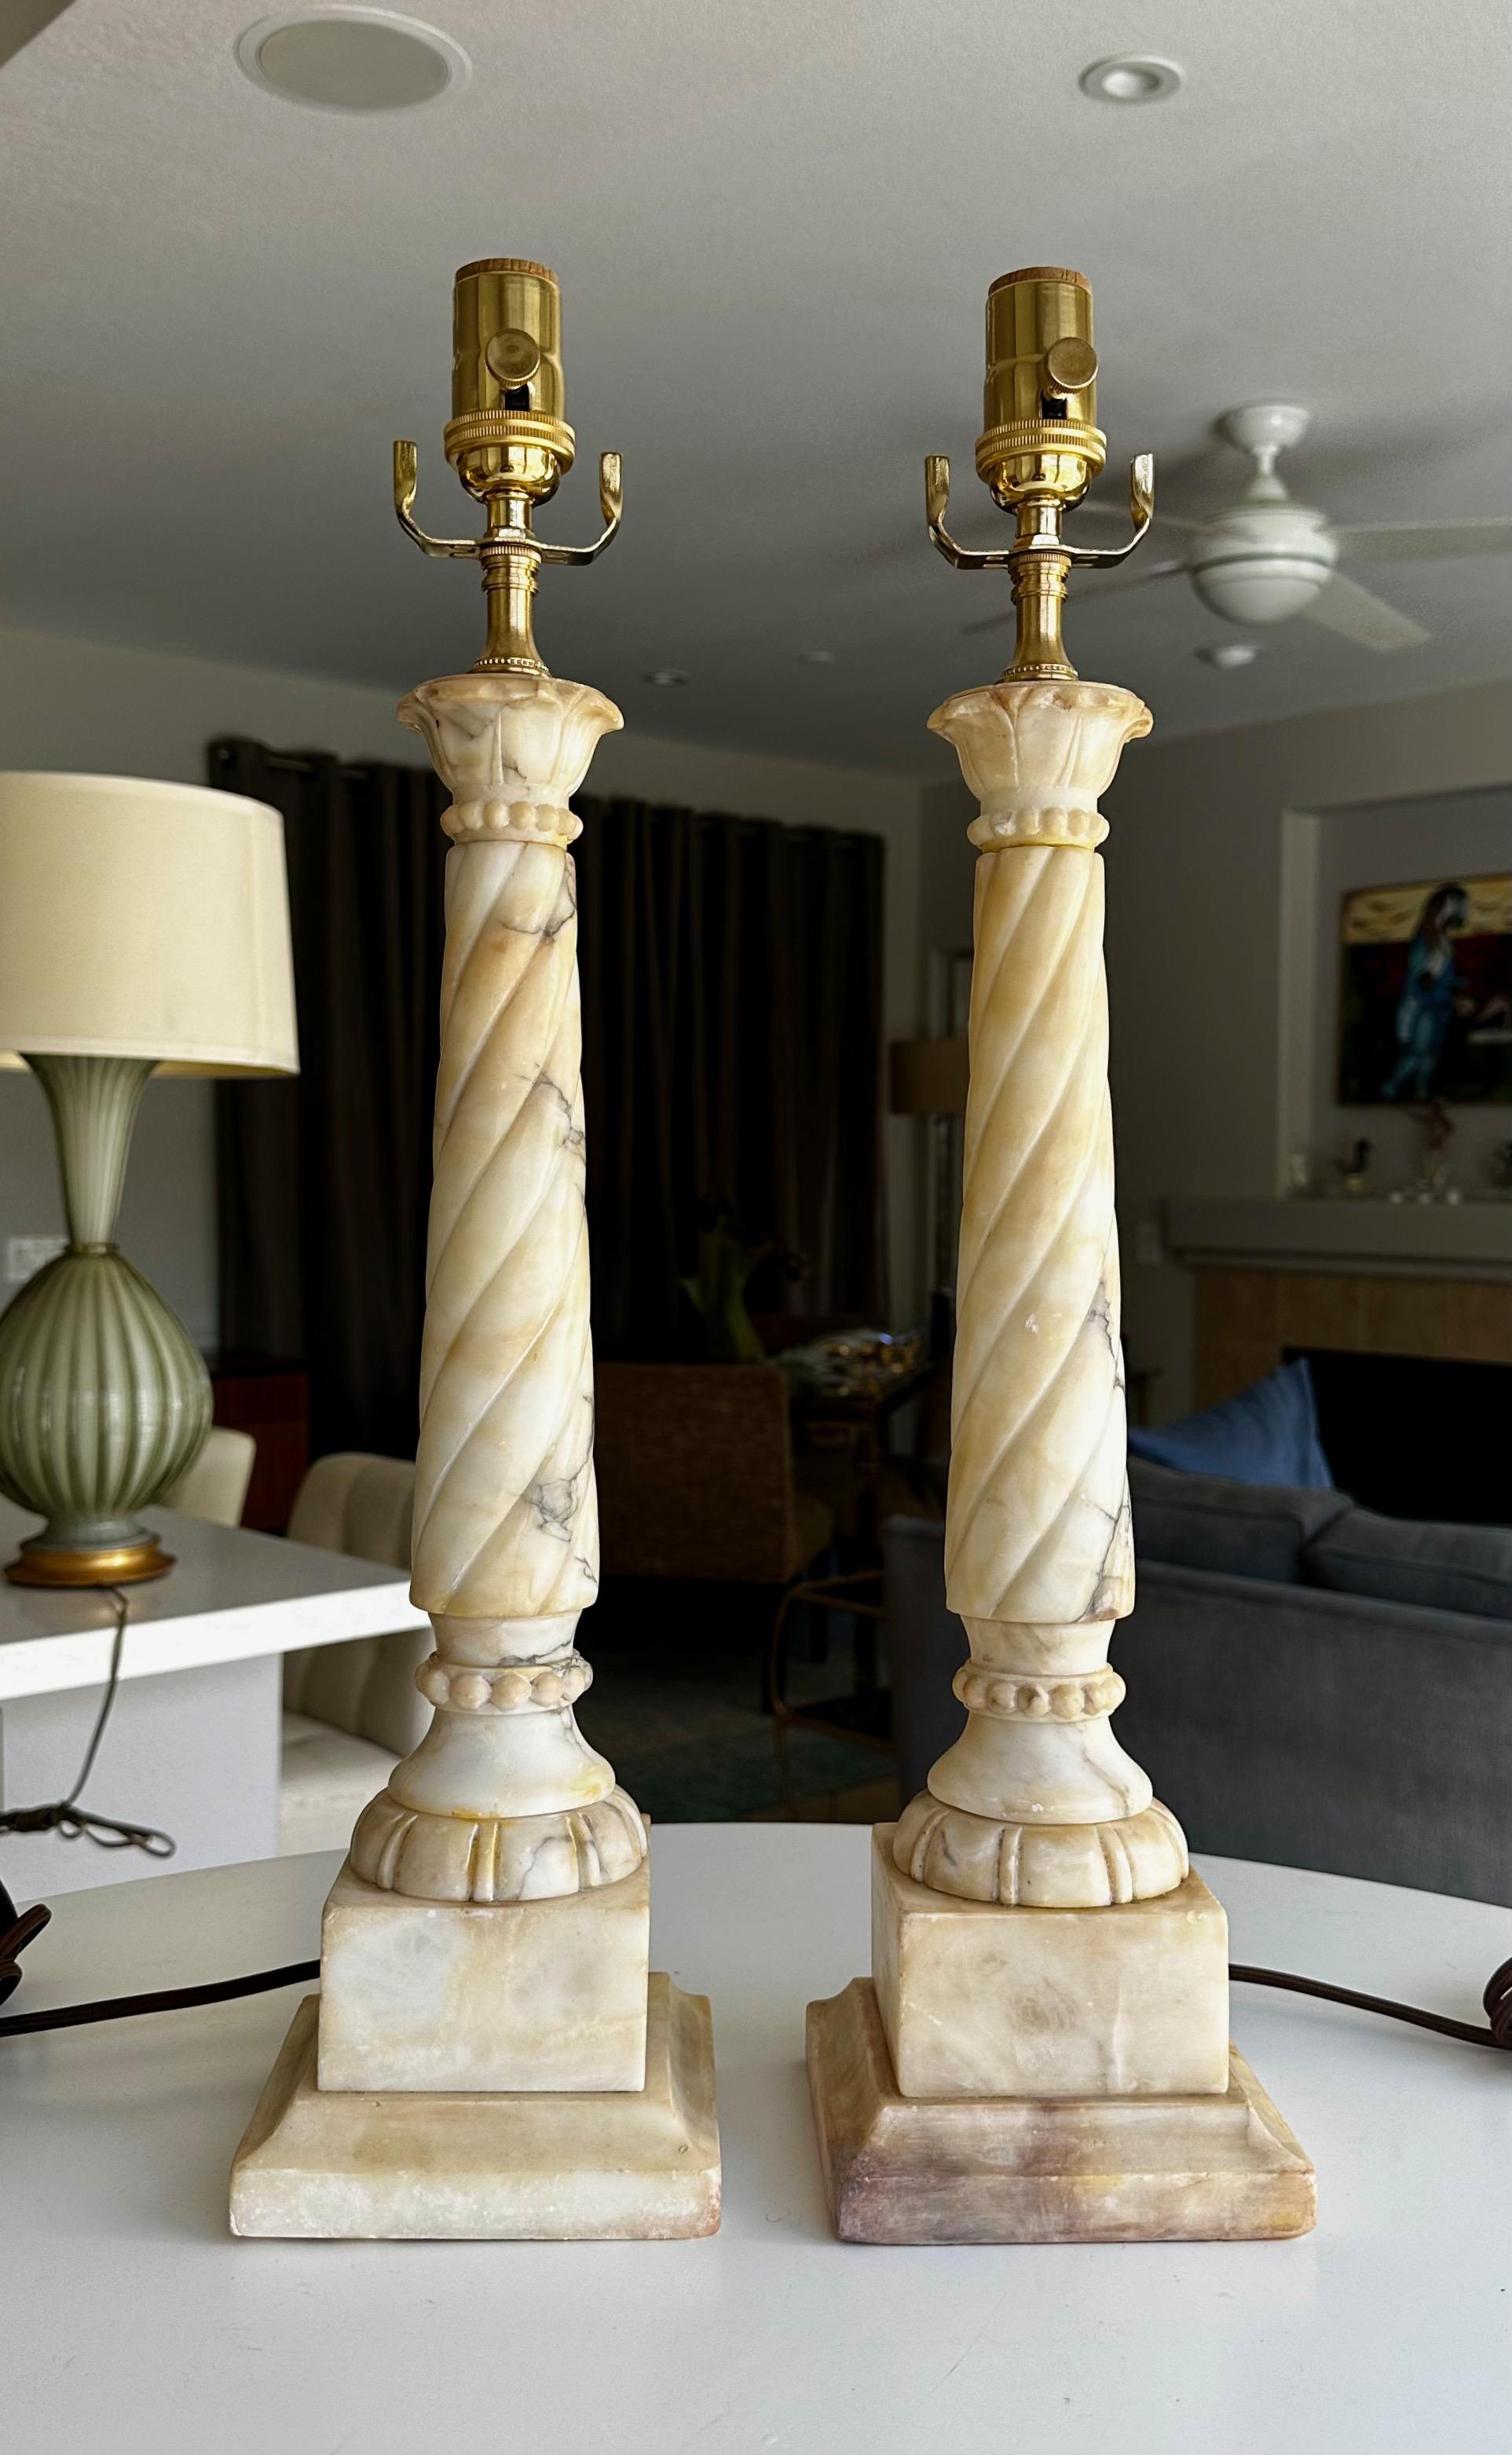 Pair of hand carved neoclassic style twisted column theme alabaster lamps. The alabaster has yellow and brown highlights throughout see close ups. Newly wired with 3 way brass sockets and rayon covered corded cords.

.